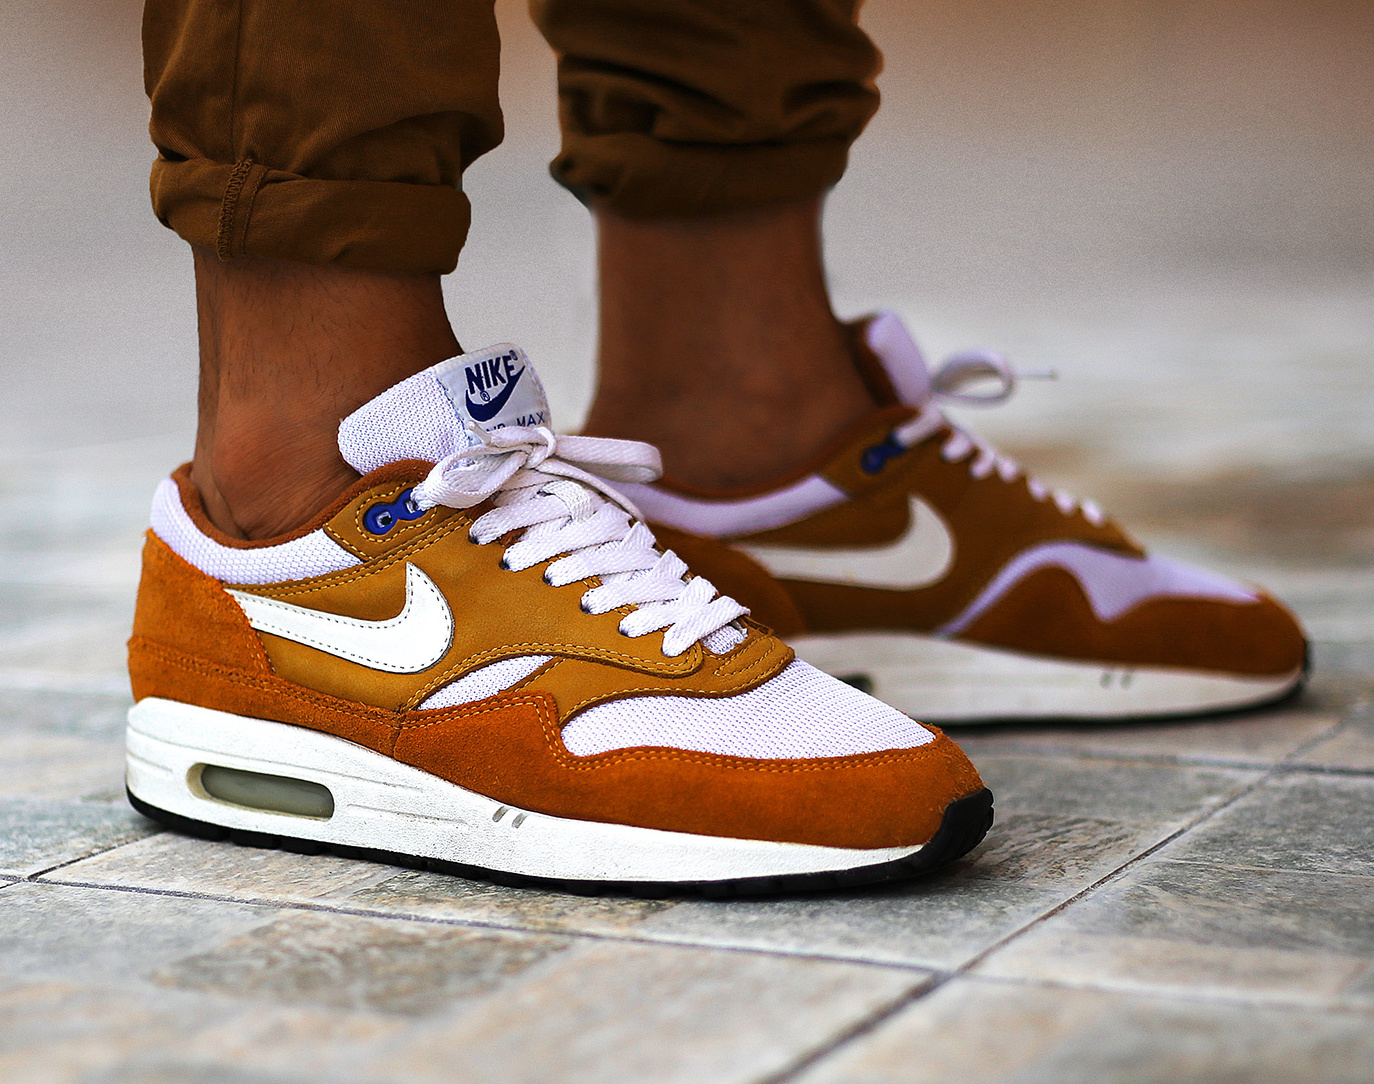 Now Available: Nike Air Max 1 Premium 